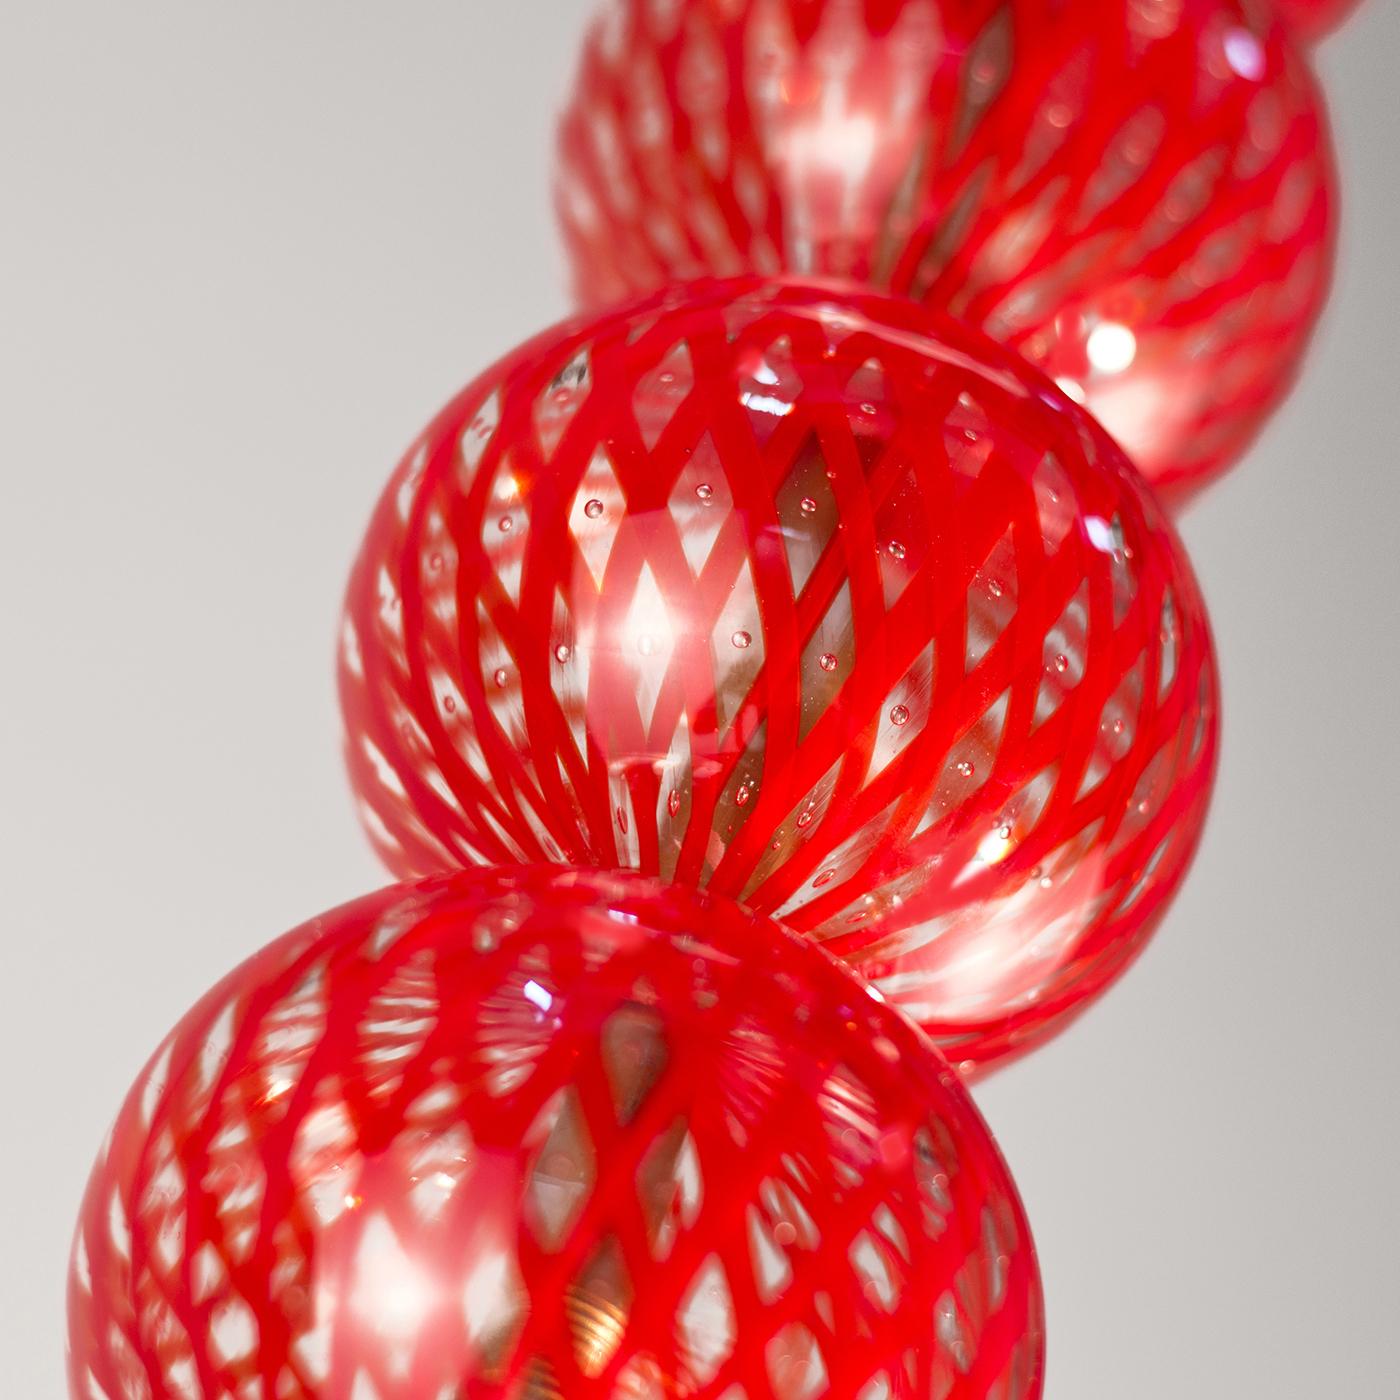 Inspired by the 1920s Venetian trend of glass vegetables and fruit, this chandelier is inspired by gooseberries. With a Minimalist design for contemporary homes, the glass spheres are made in red and transparent glass using the reticello technique